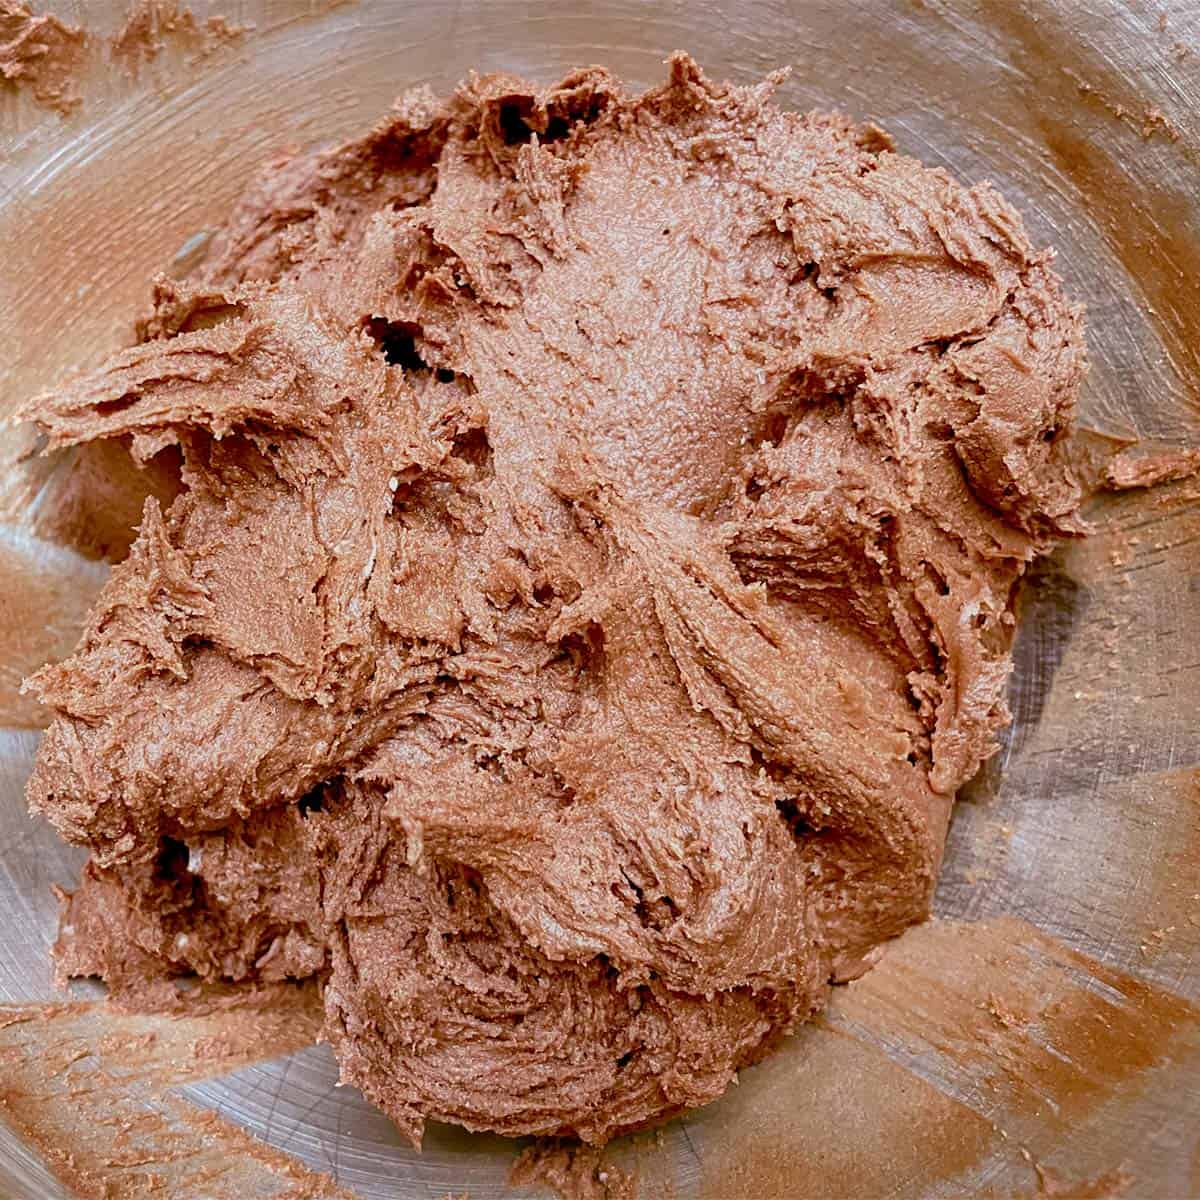 Chocolate cookie dough after all the ingredients are mixed.